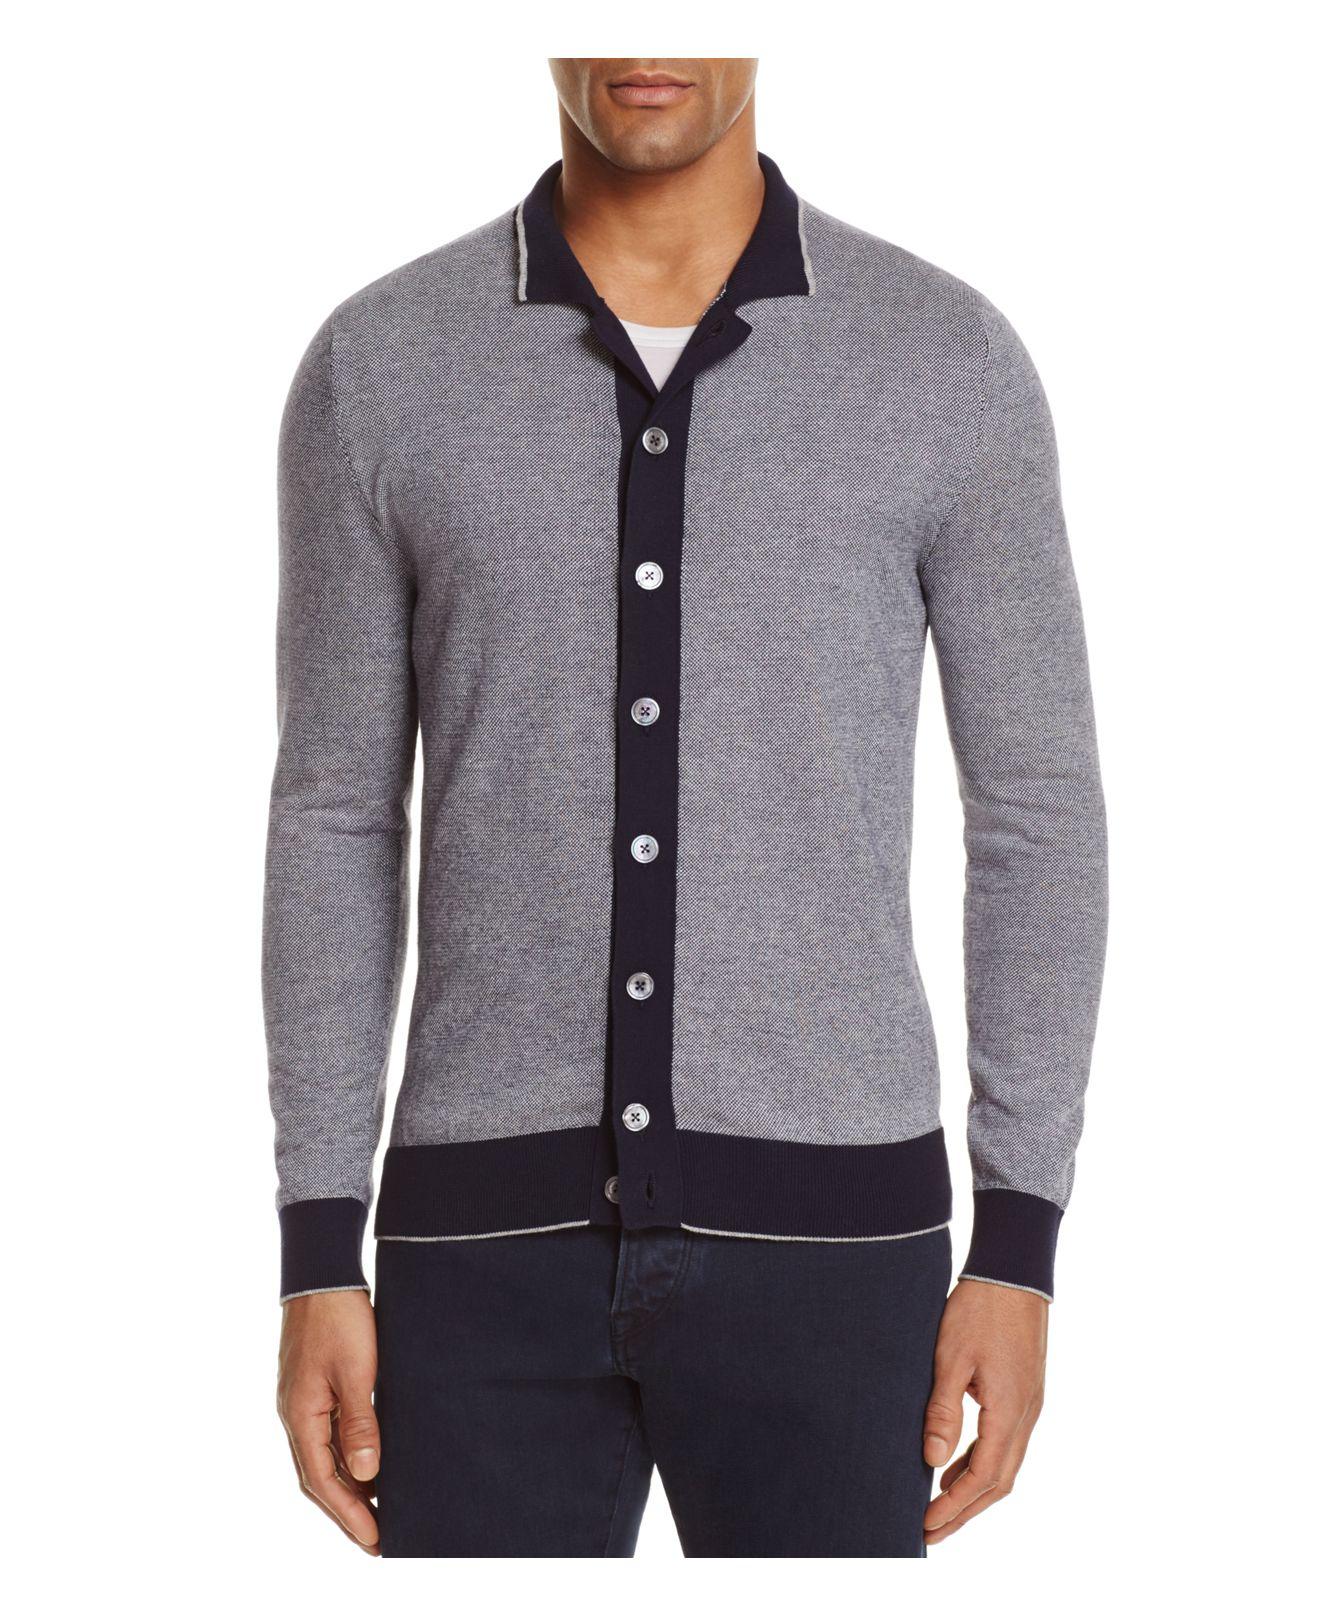 Lyst - Eleventy Textured Tipped Cardigan Sweater in Gray for Men